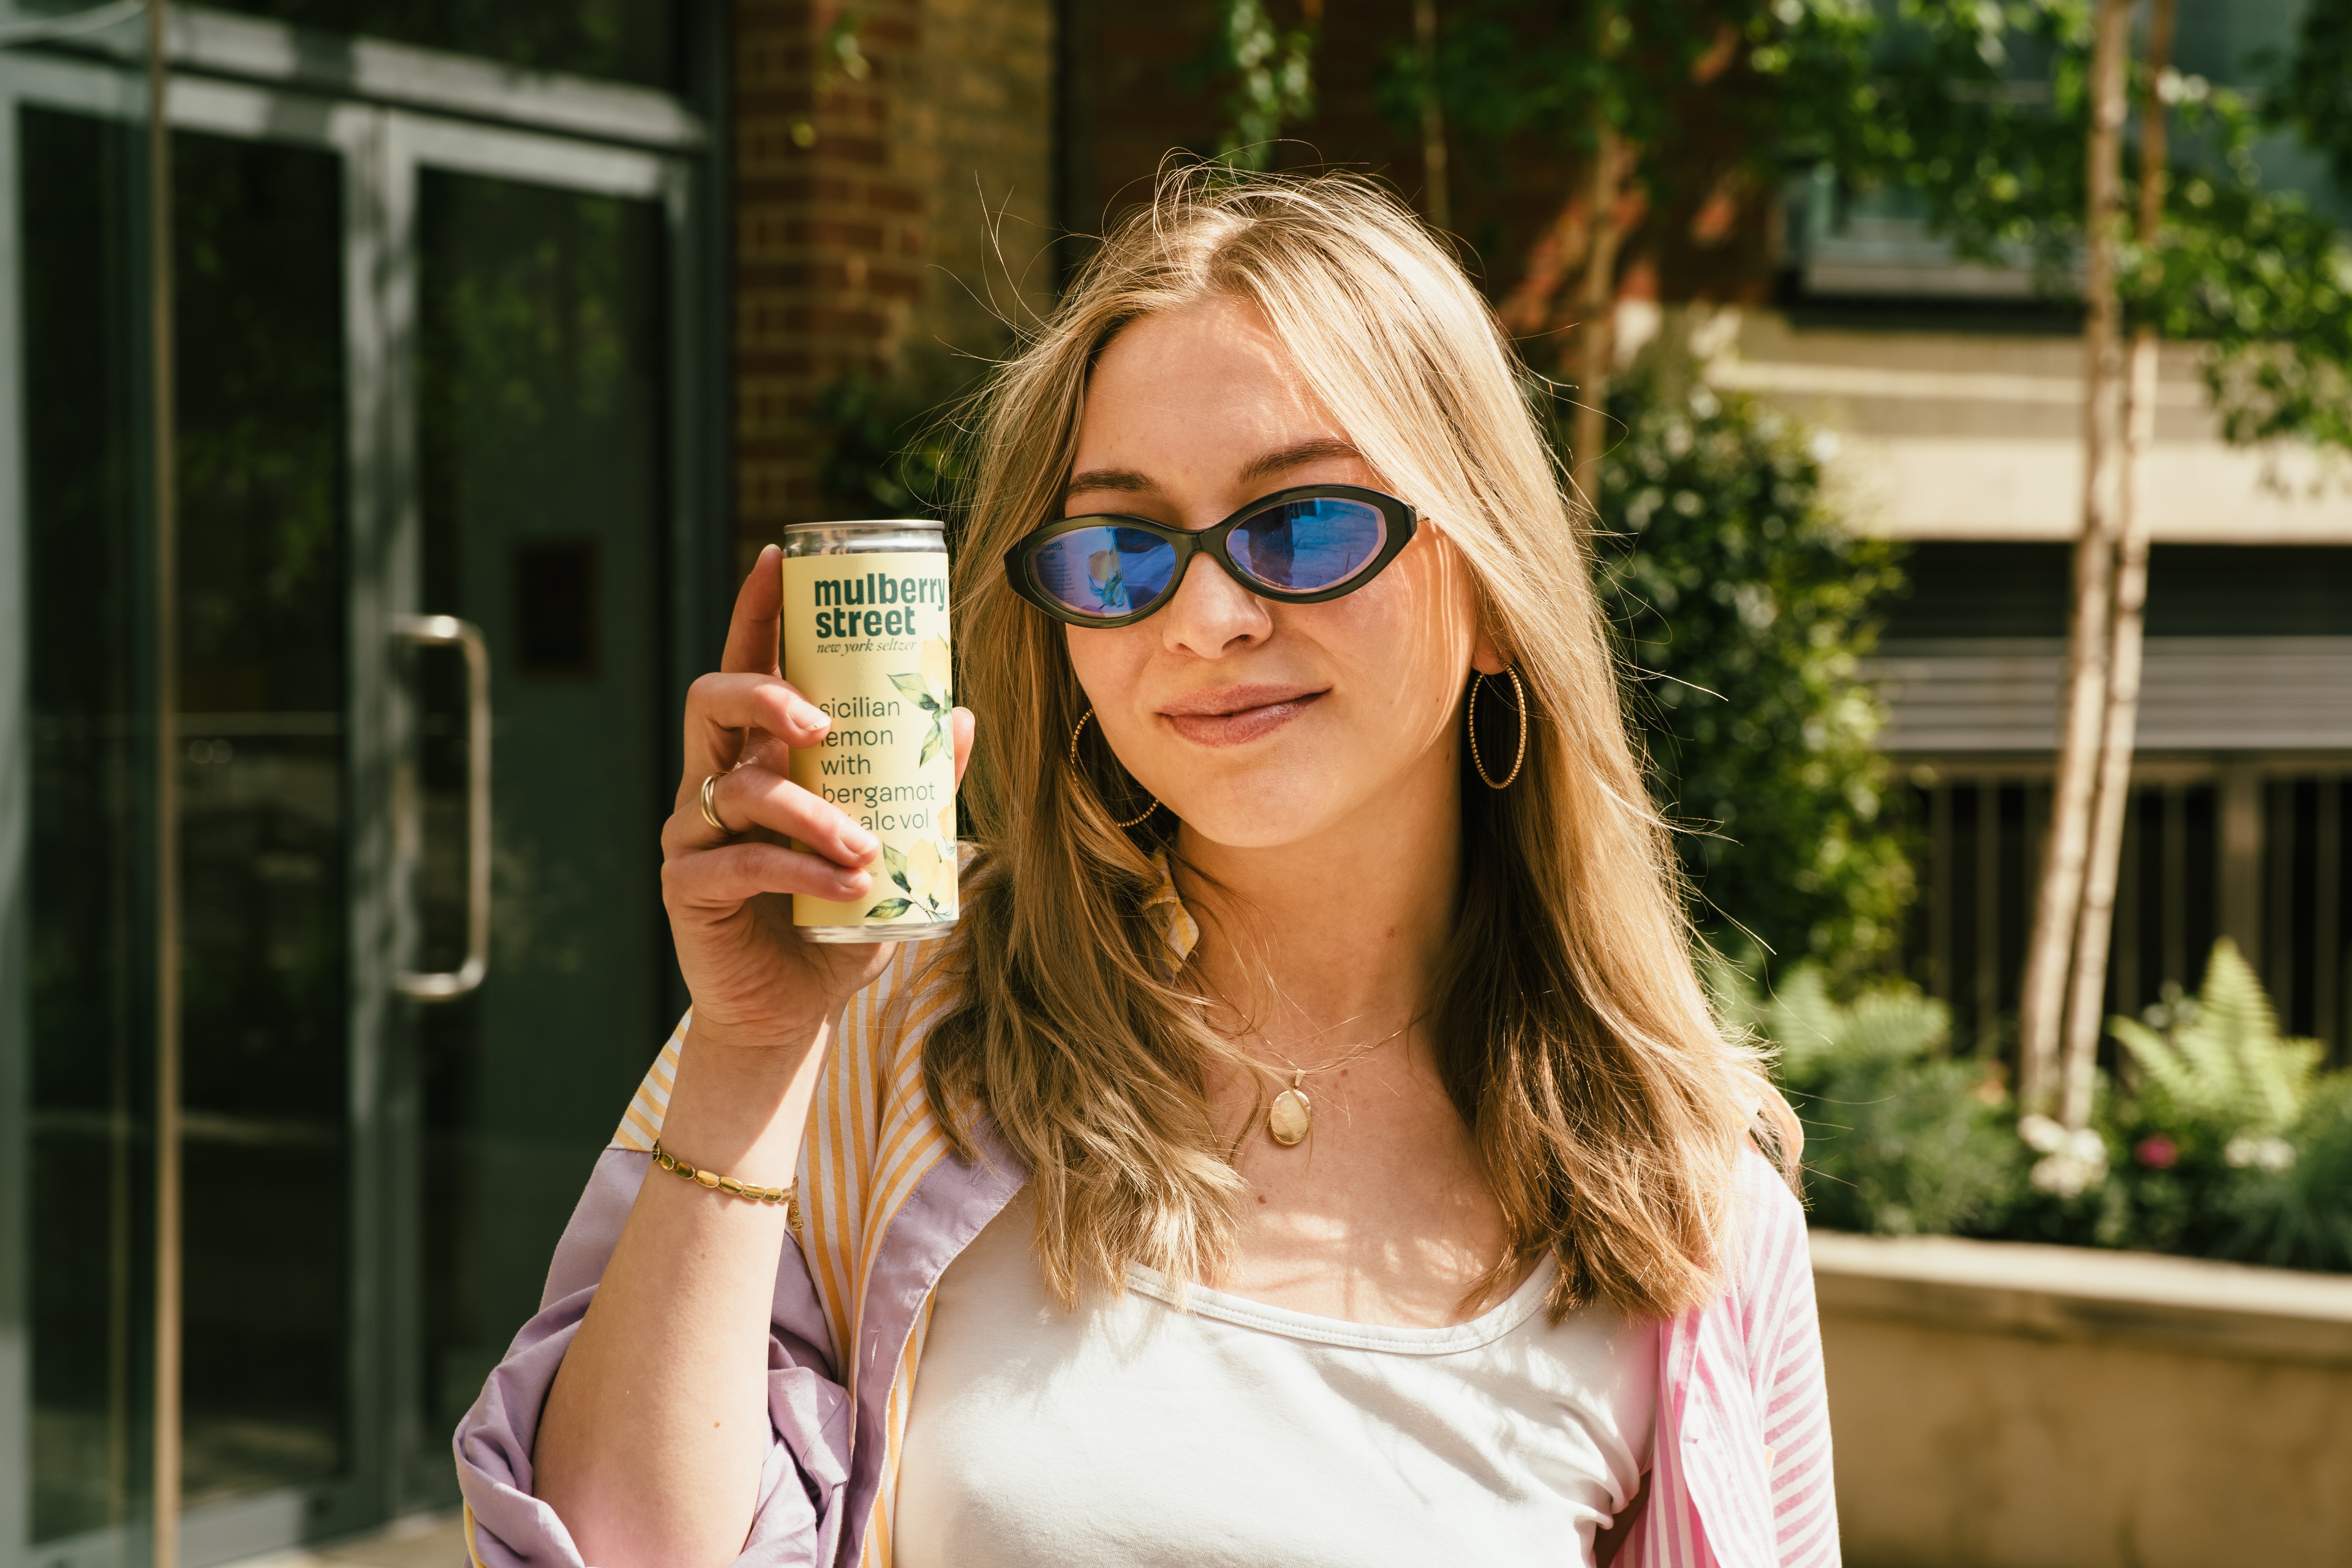 A person holding a can of Mulberry Street Lemon Seltzer